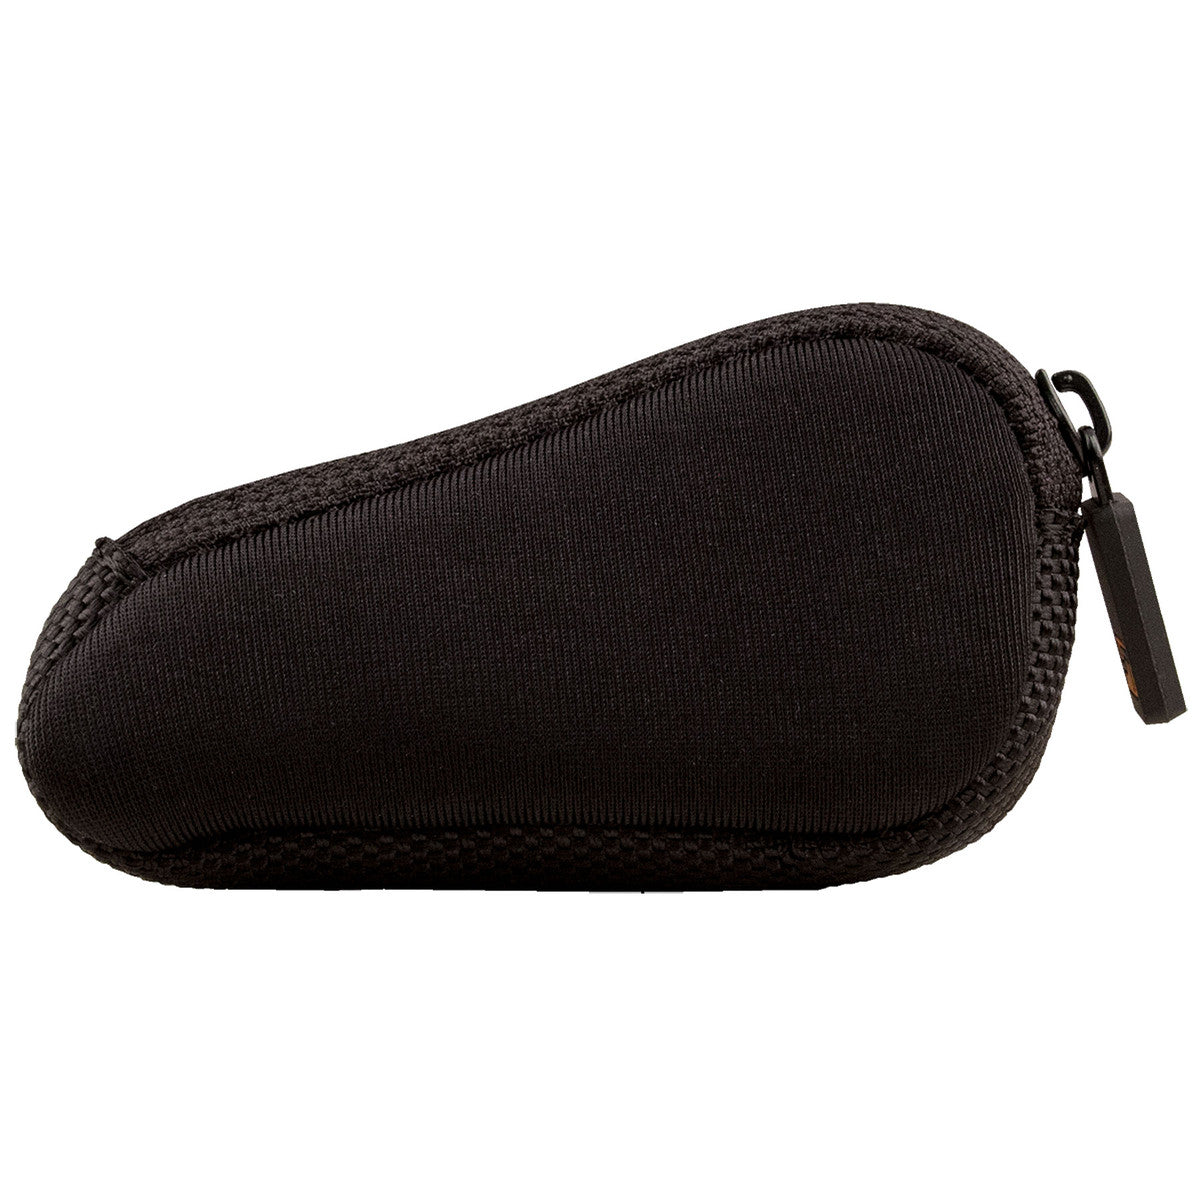 Neoprene French Horn Mouthpiece Pouch - Black